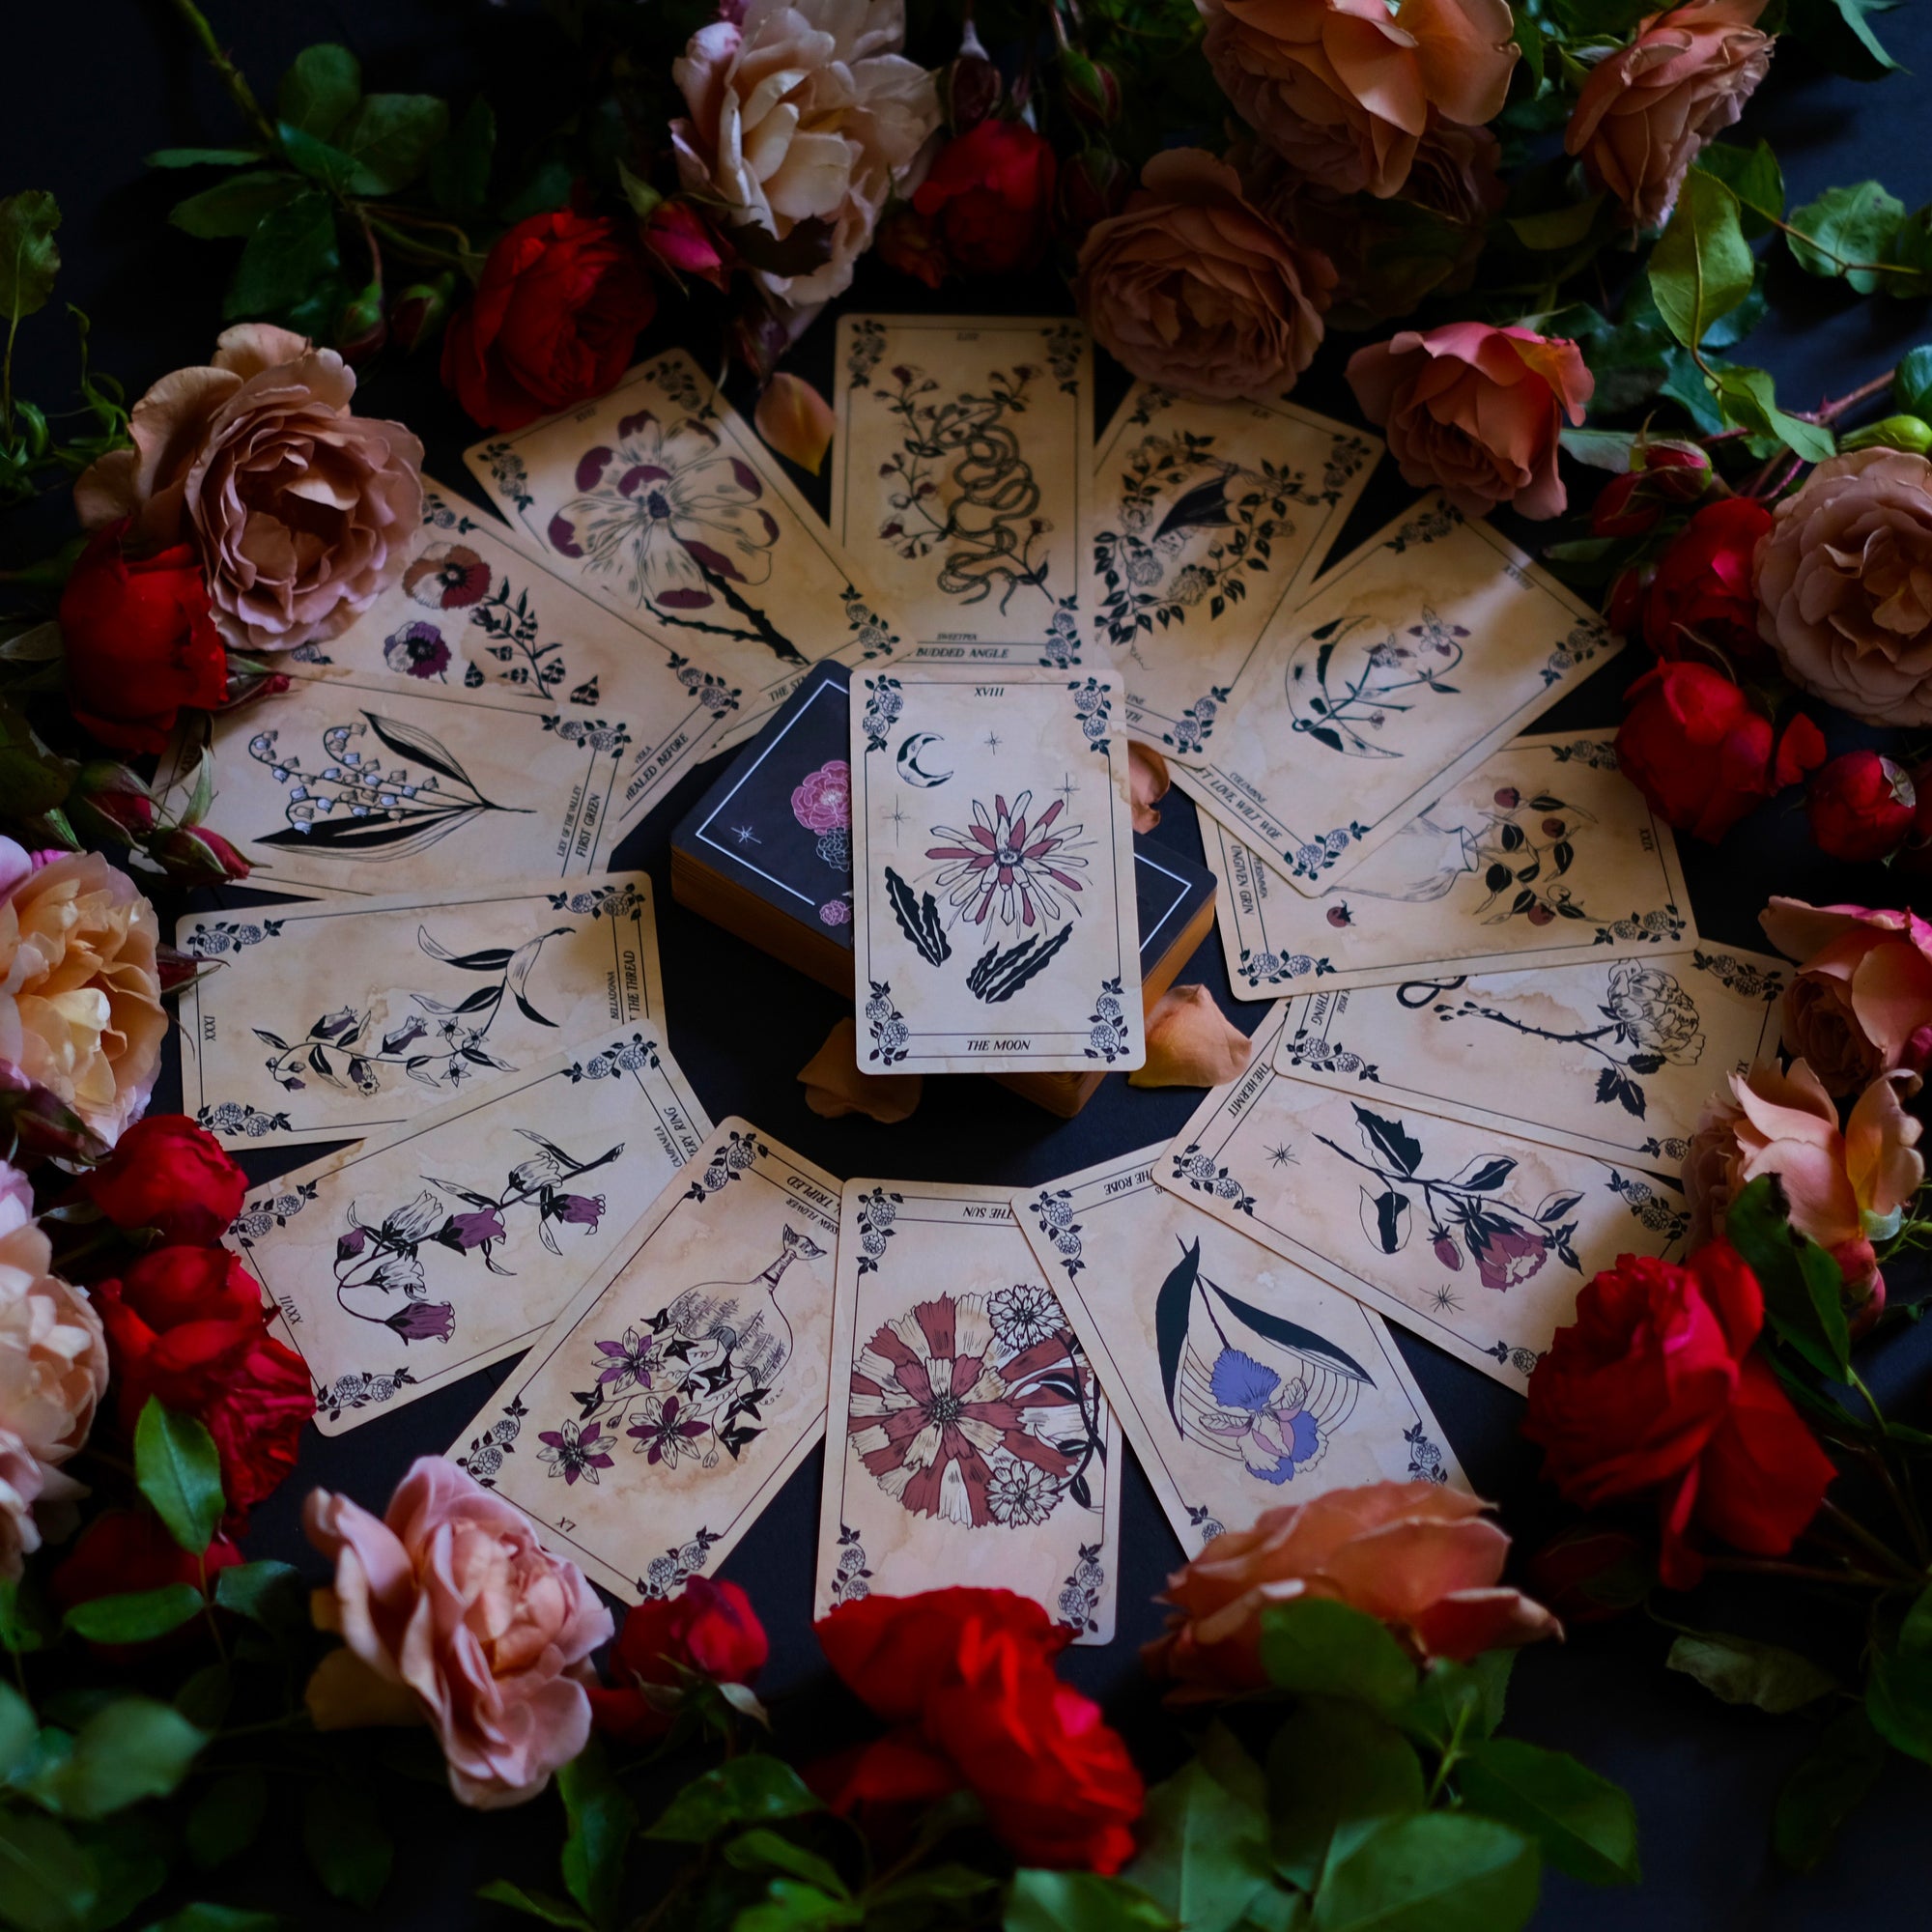 The Botanical Oracle deck, Maiden, illustrated by hand, rooted in botanicals, with guidebook.